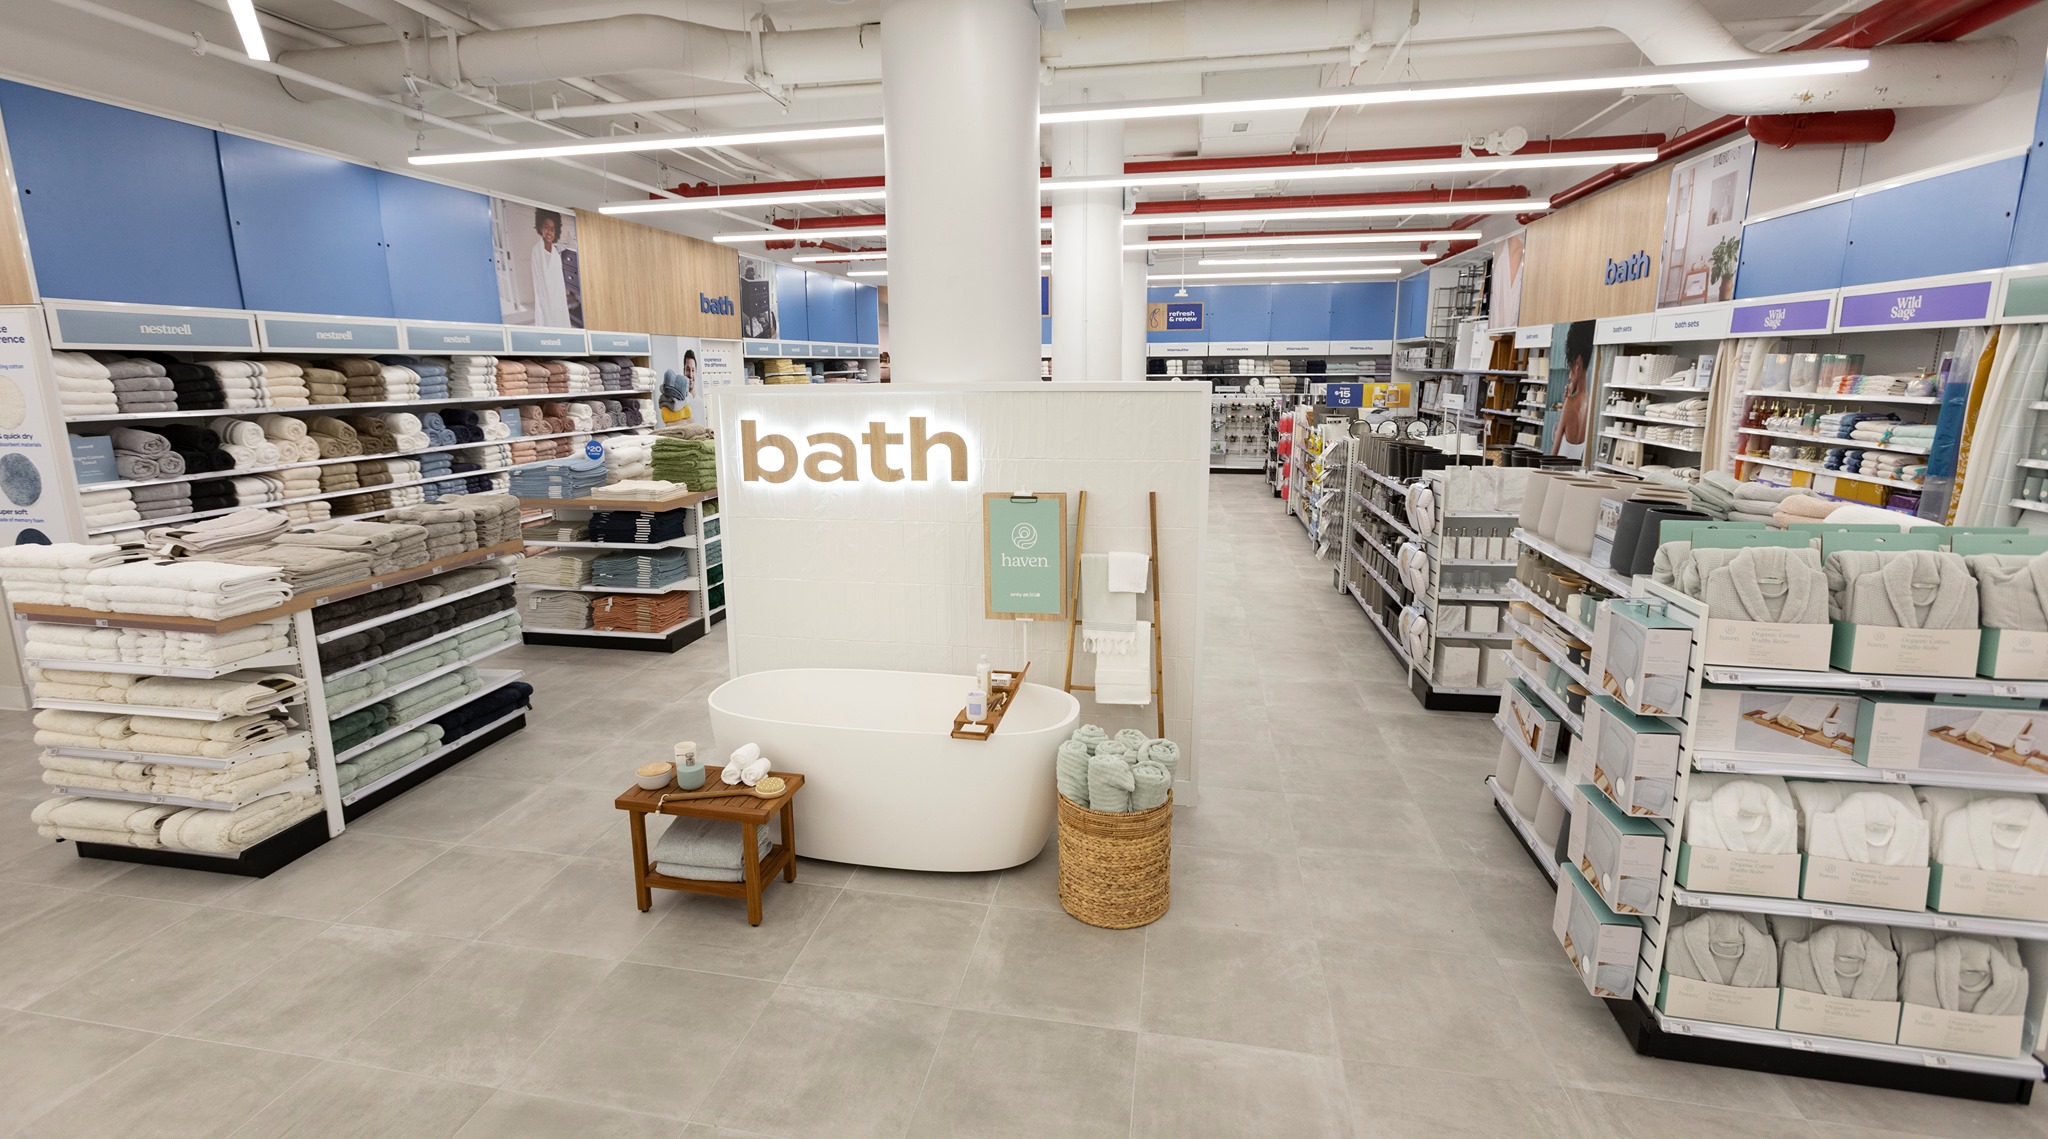 Bed Bath and beyond coupon code